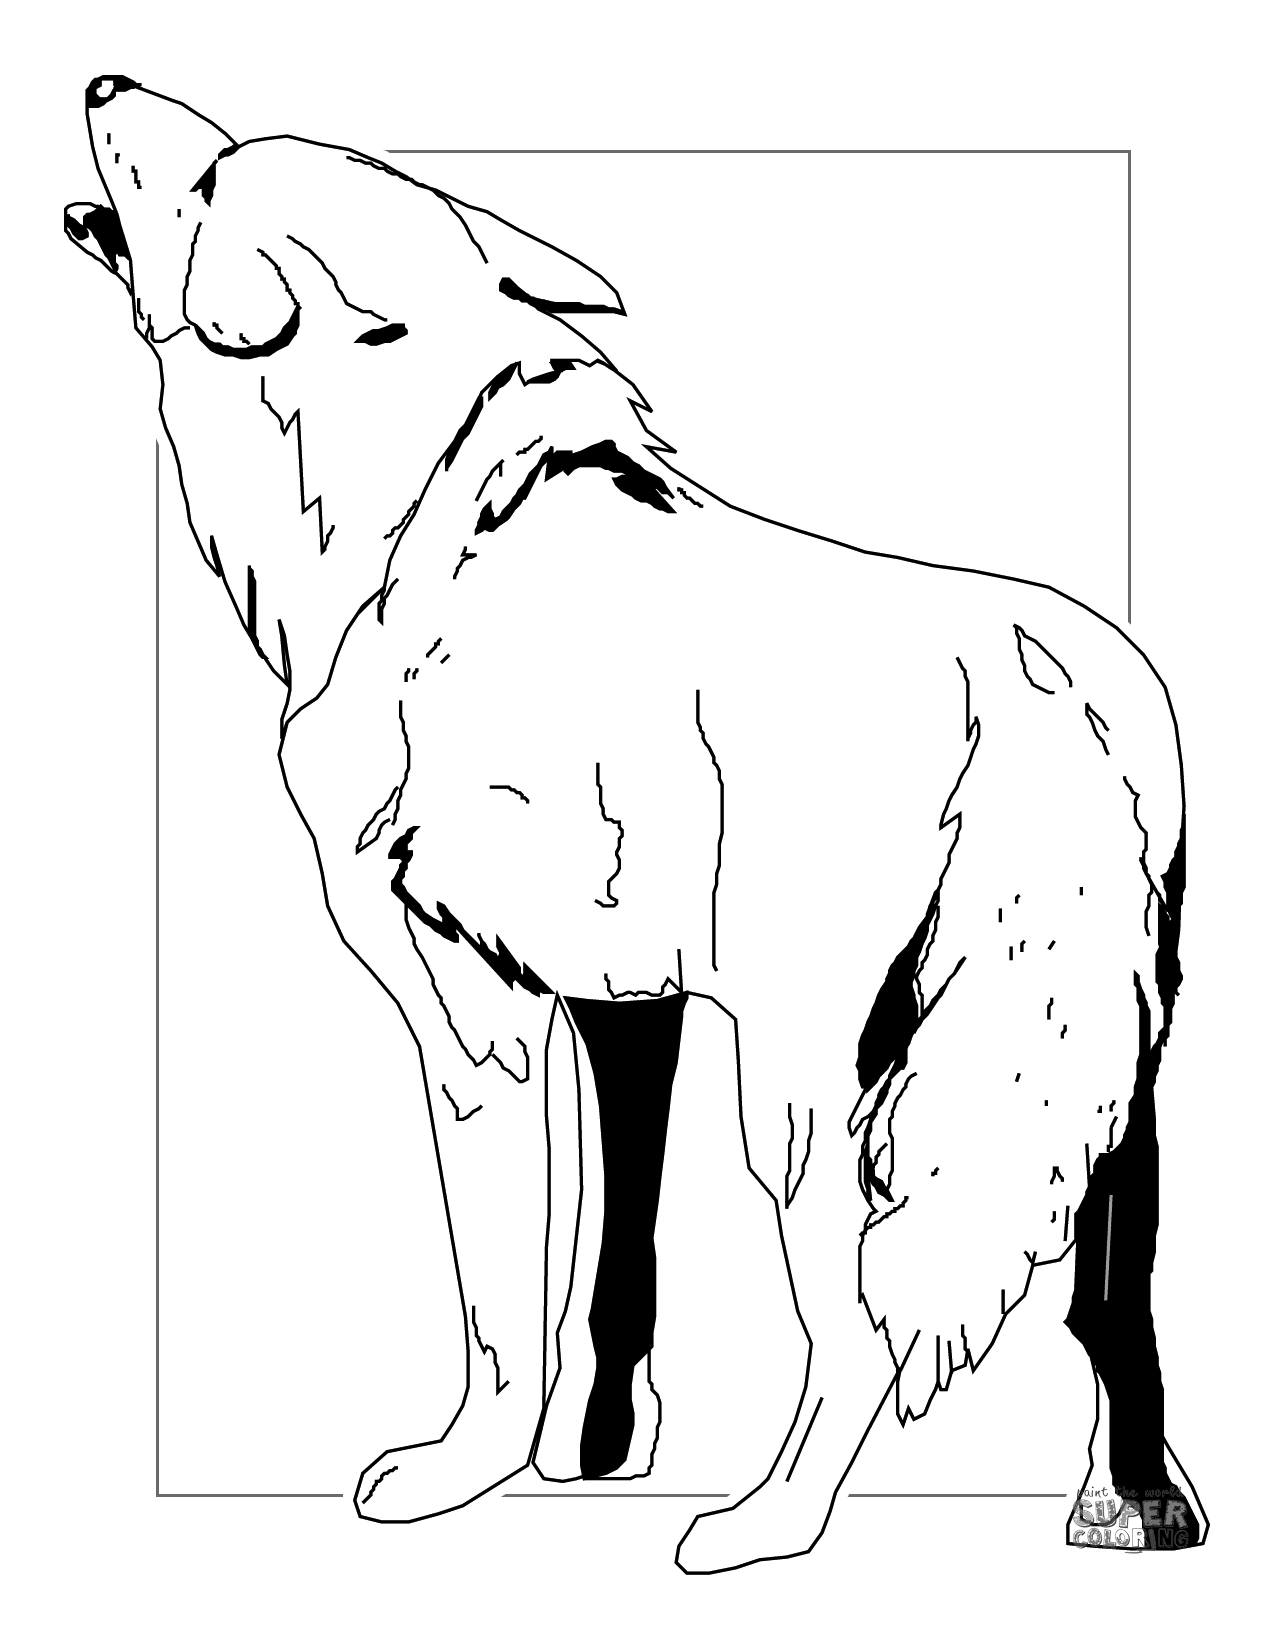 Coyote Line Art For Coloring